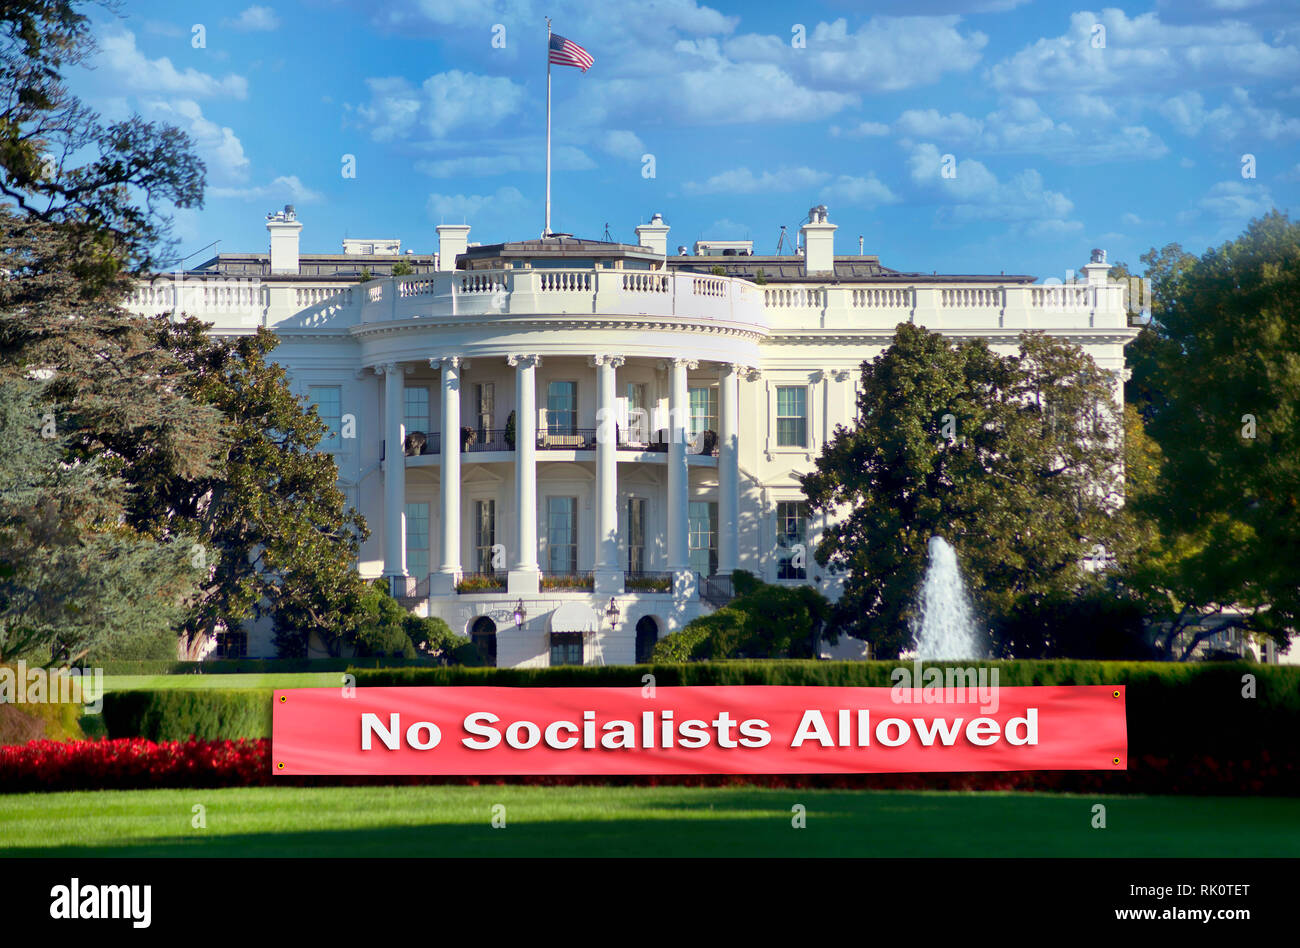 No Socialist allowed in US Whitehouse. Stock Photo